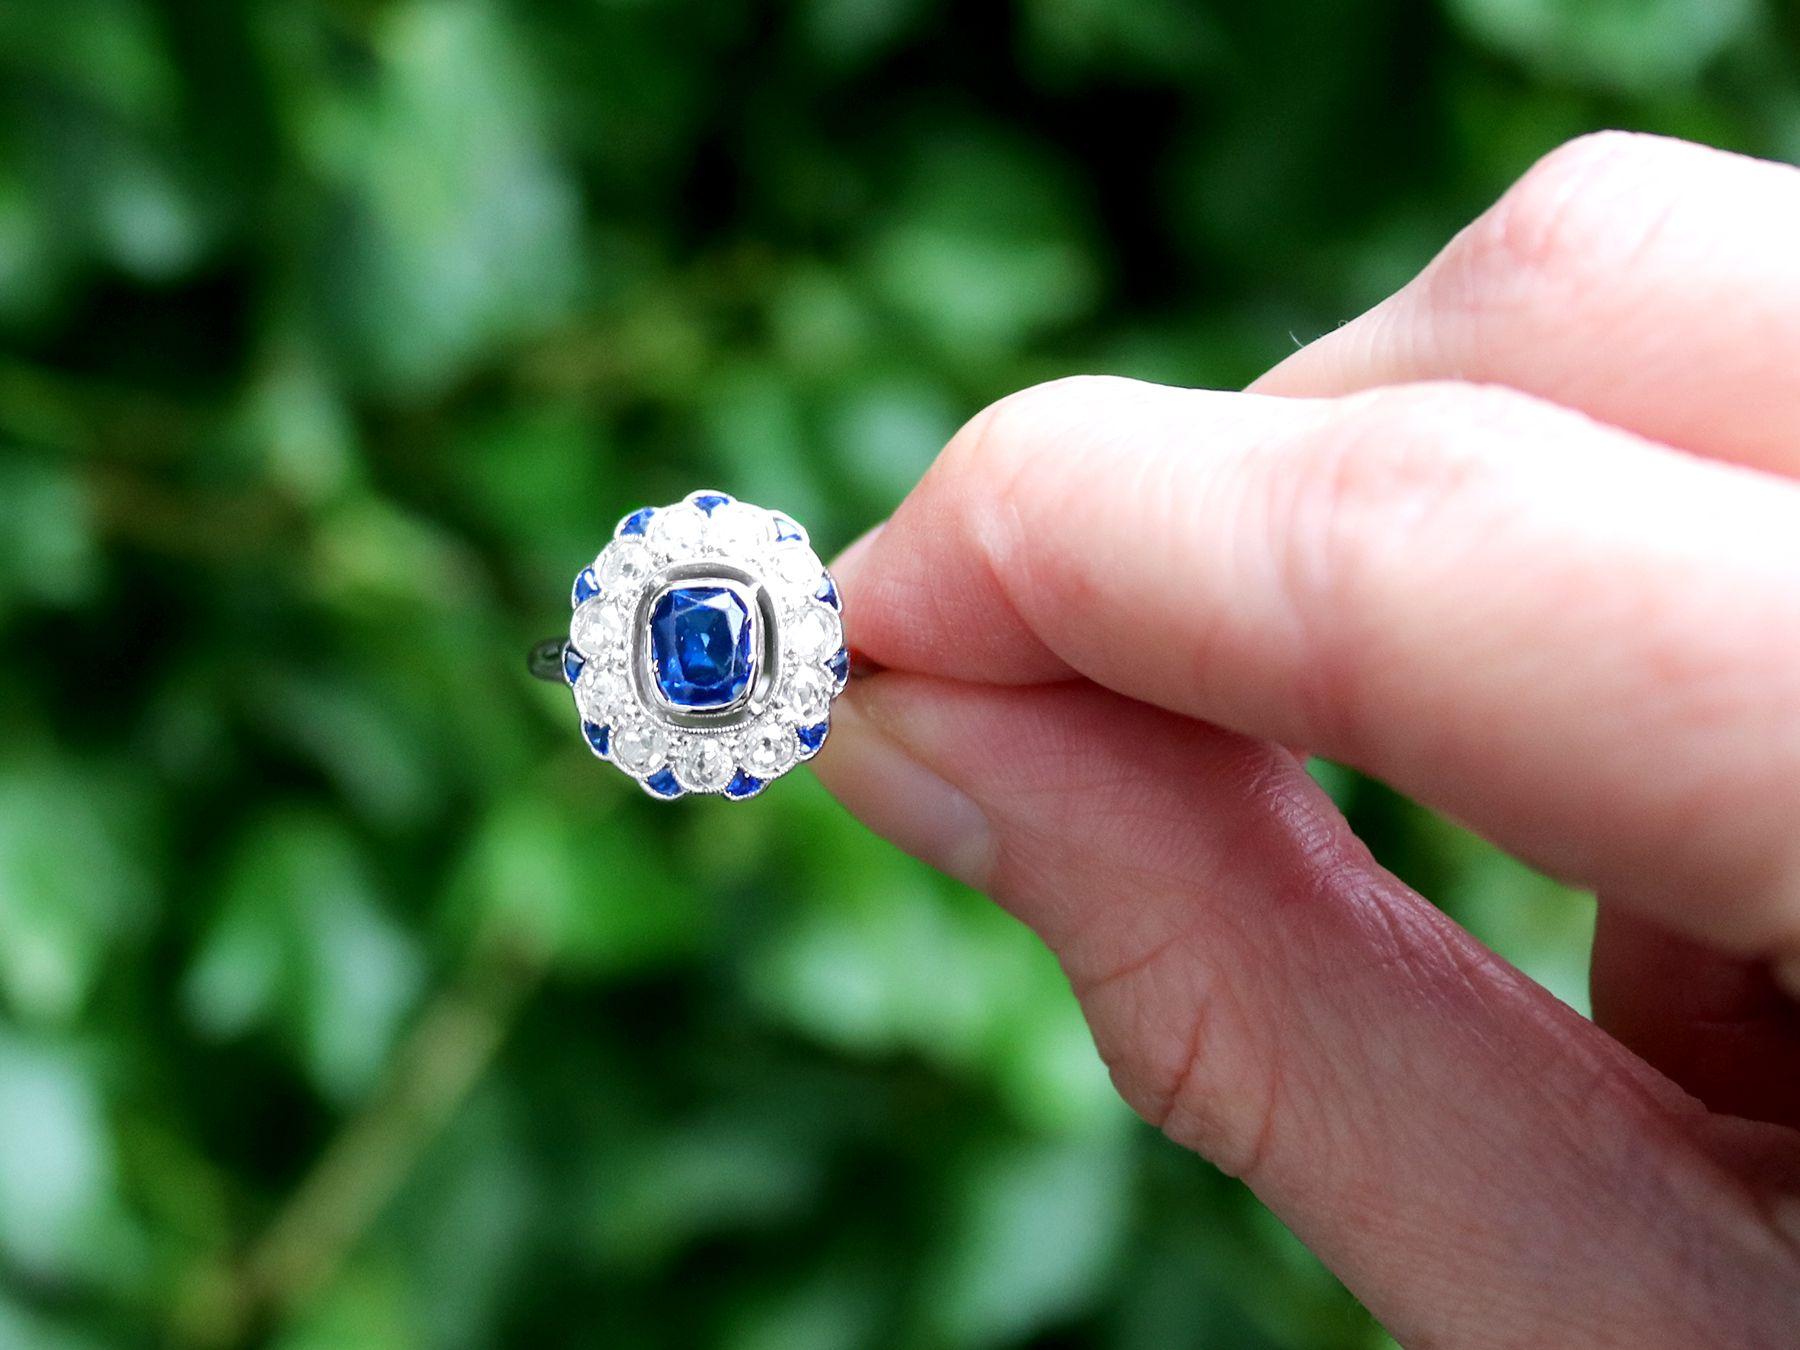 A stunning, fine and impressive 0.86 carat sapphire and 0.66 carat diamond, 18 karat white gold and platinum set cocktail ring; part of our diverse antique jewelry and estate jewelry collections

This stunning, fine and impressive antique sapphire